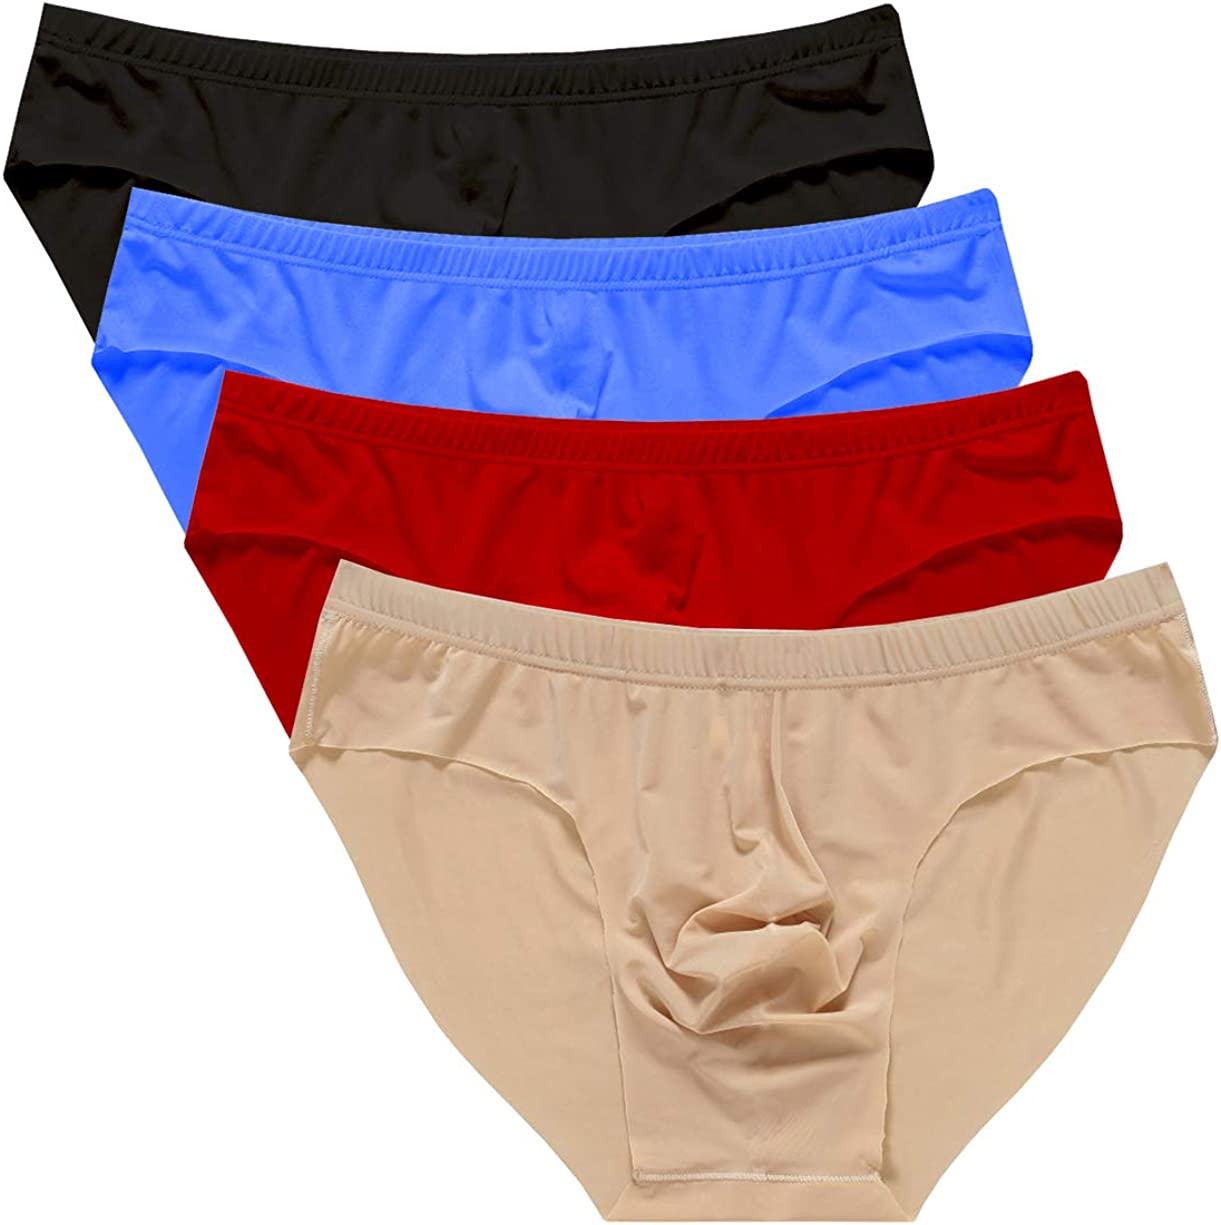  RelaxCoo Vasectomy Underwear With 2 Custom Fit Ice